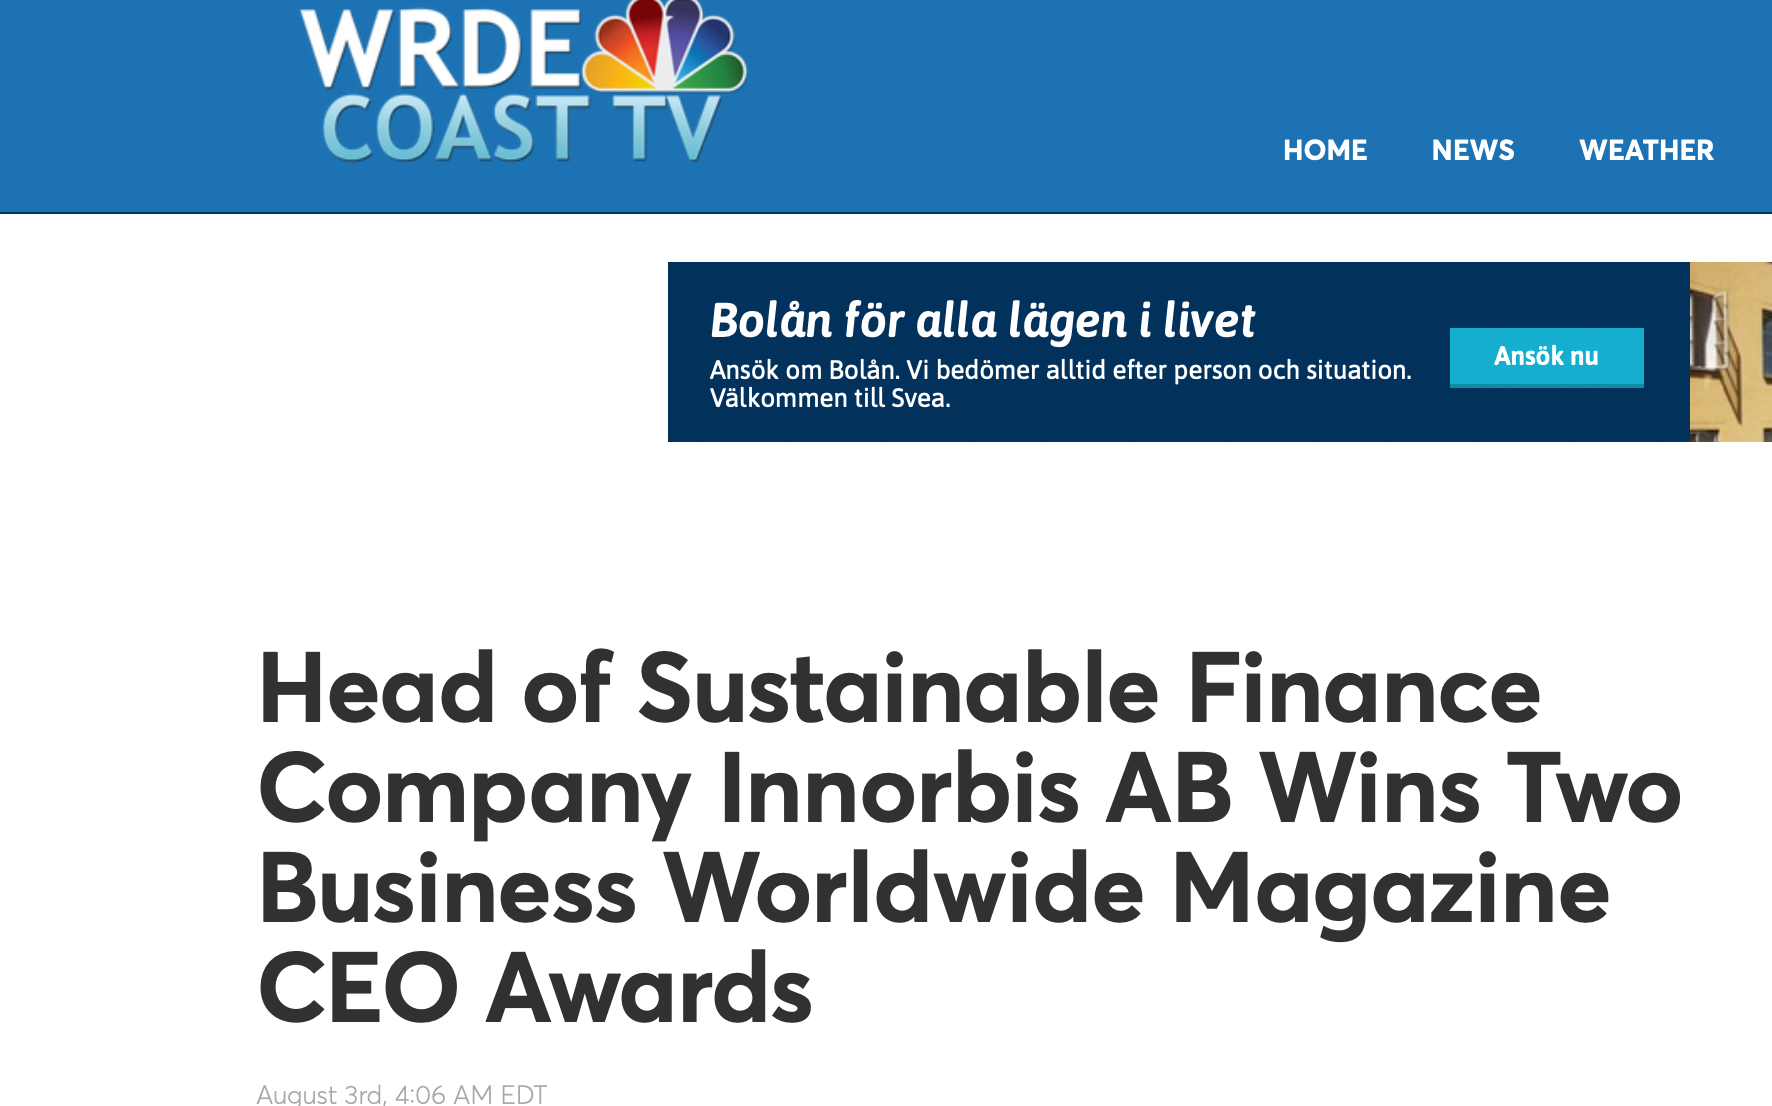 WRDE COAST TV: Best CEO in the Sustainability / ESG Systems Industry' & 'Tech Entrepreneur of the Year - Sweden'